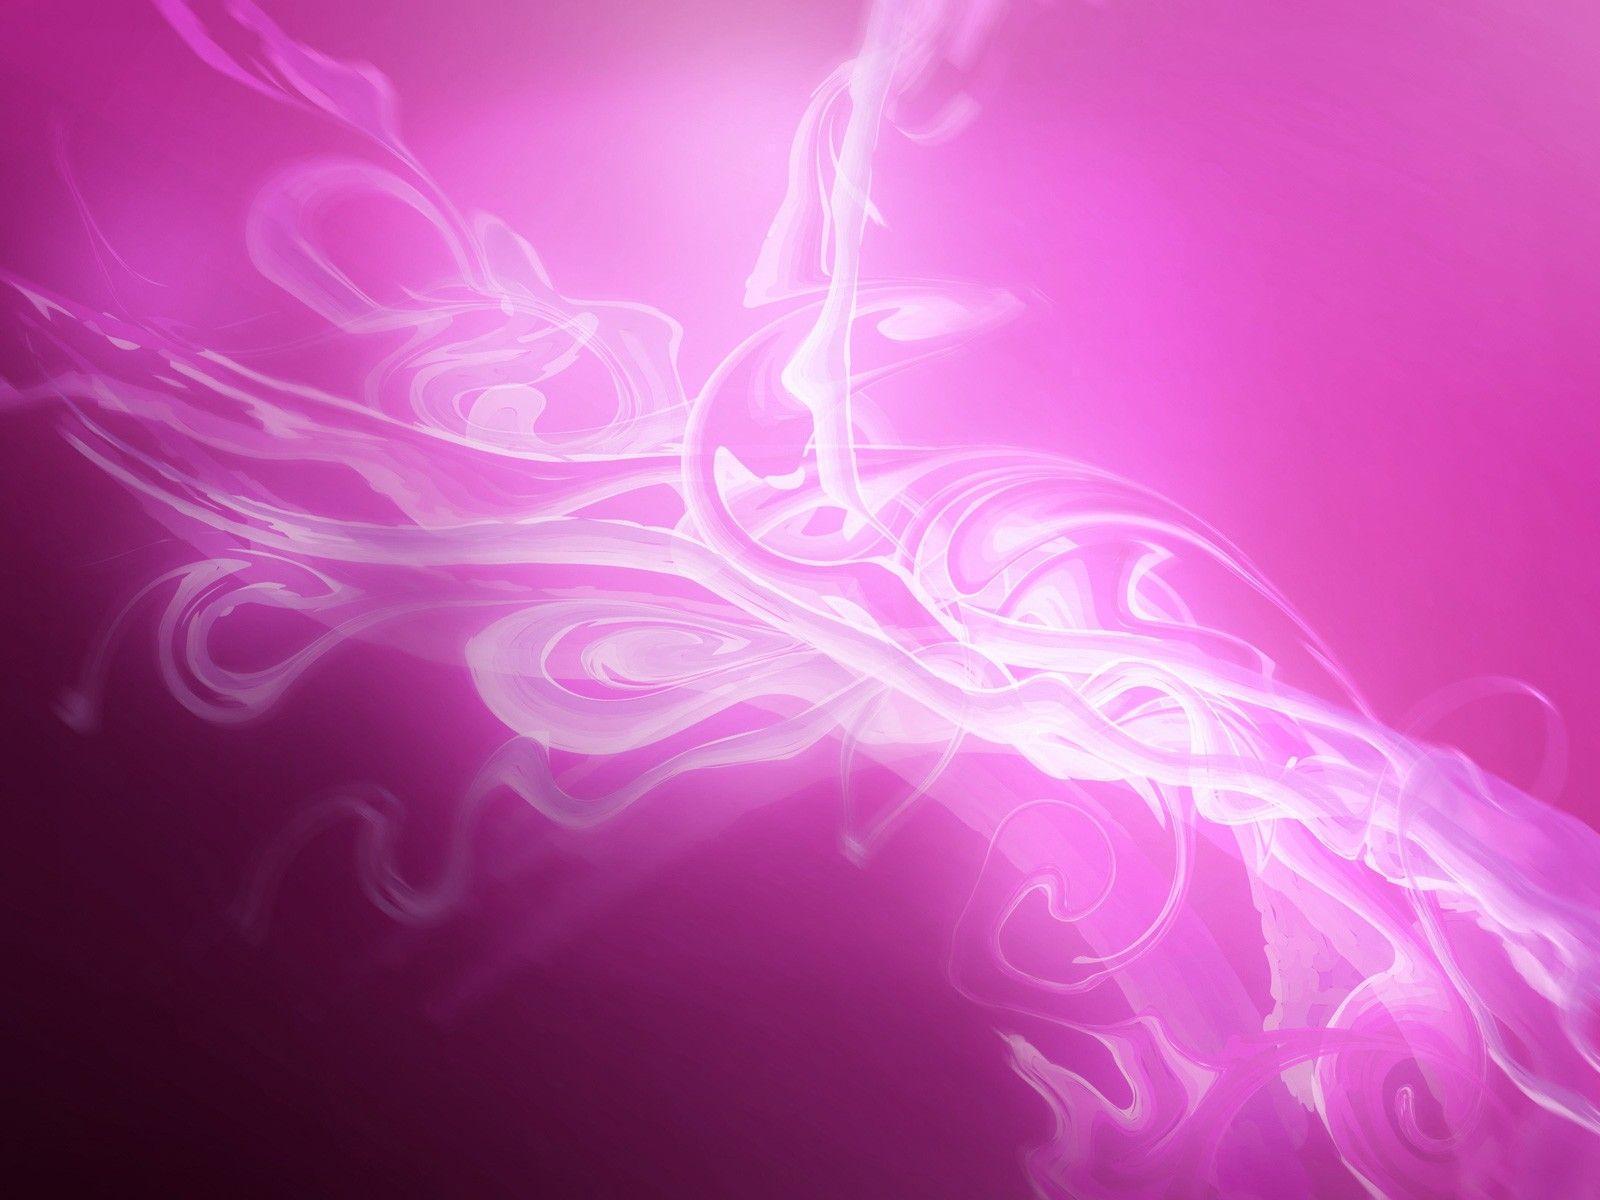 zumba background colors